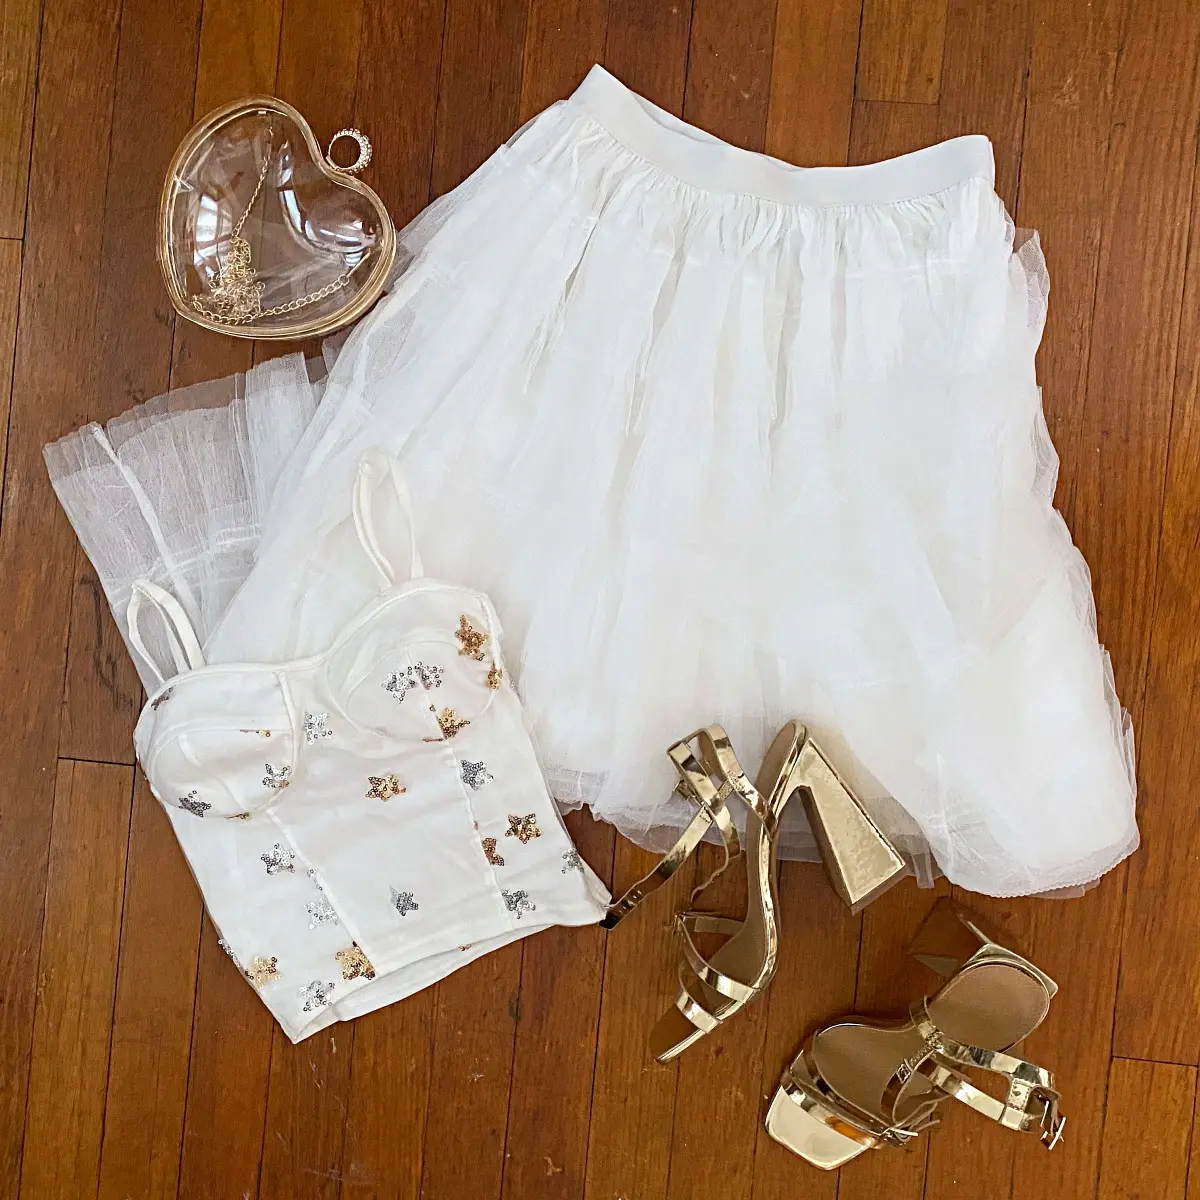 white bustier with skirt outfit